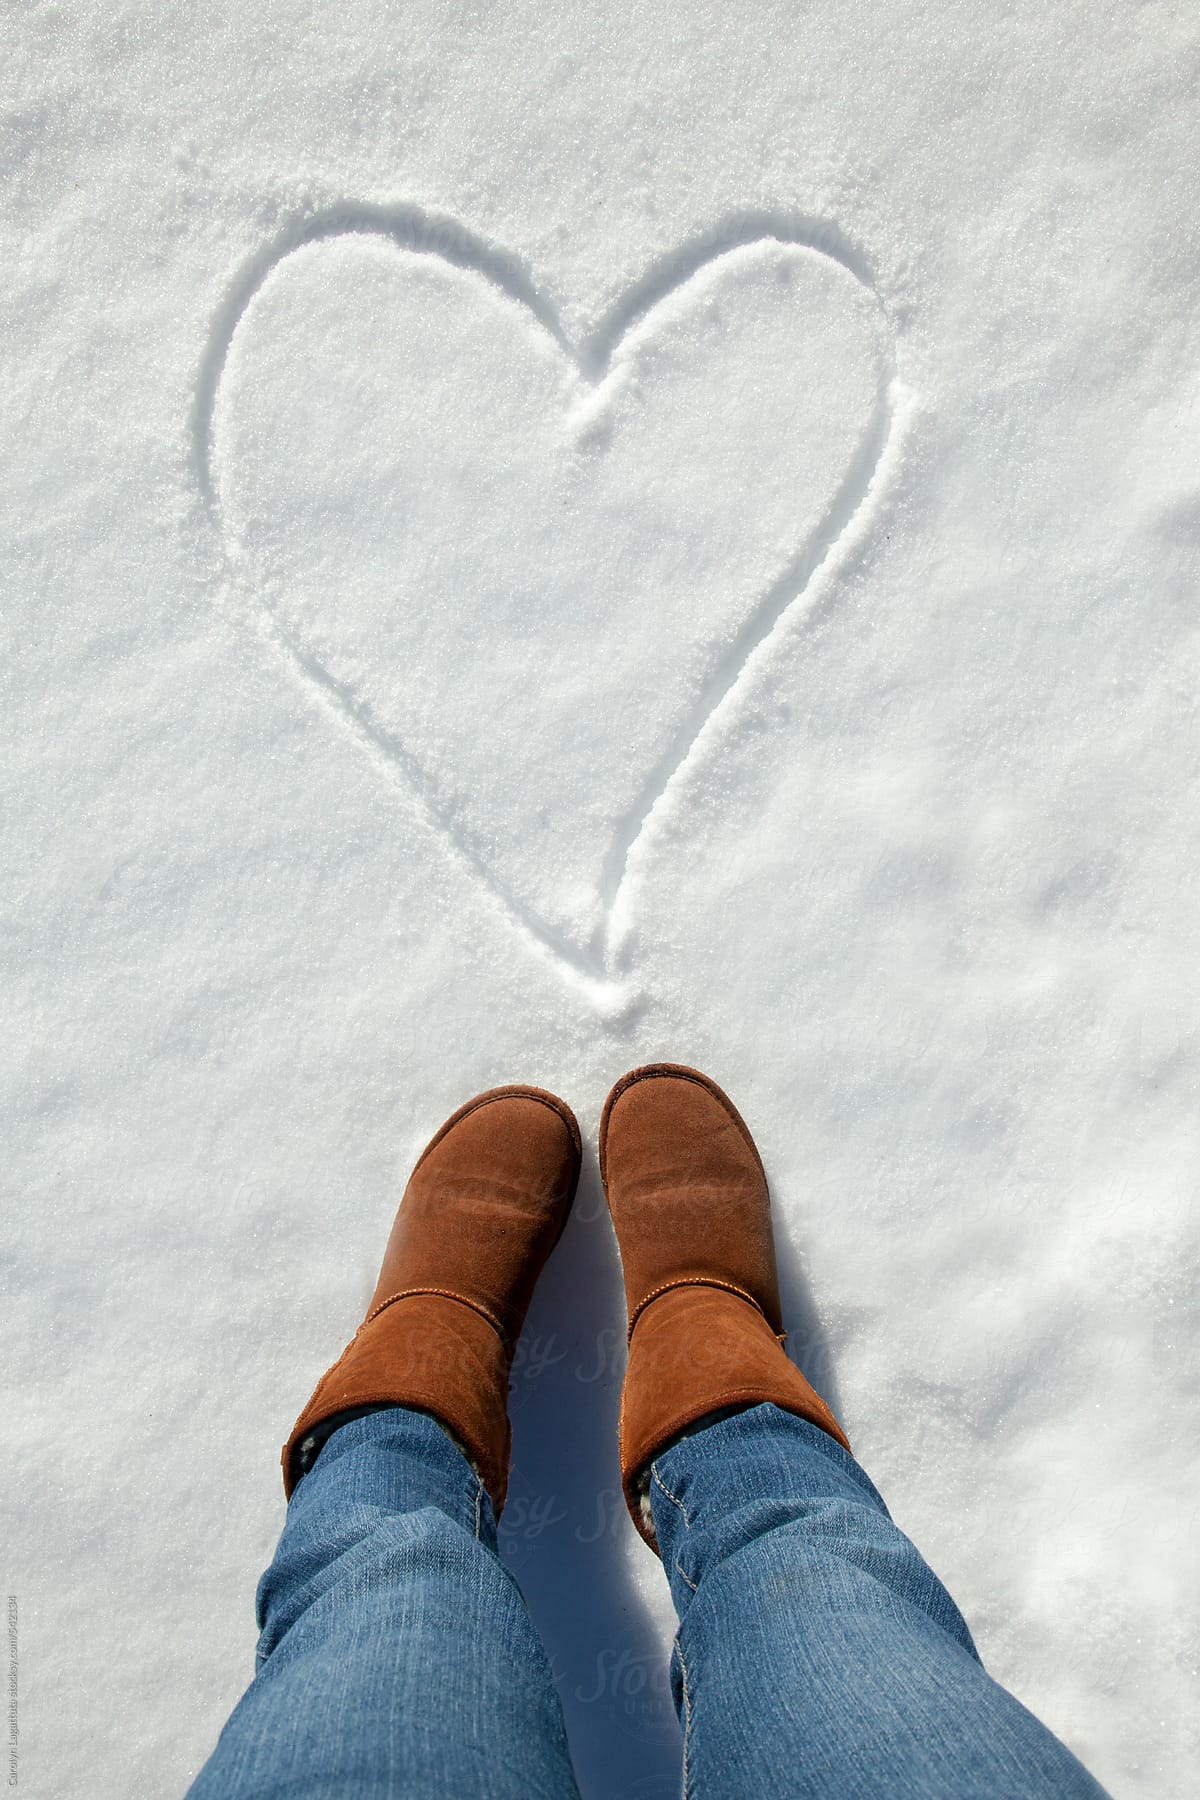 A person standing above a heart drawn in the snow